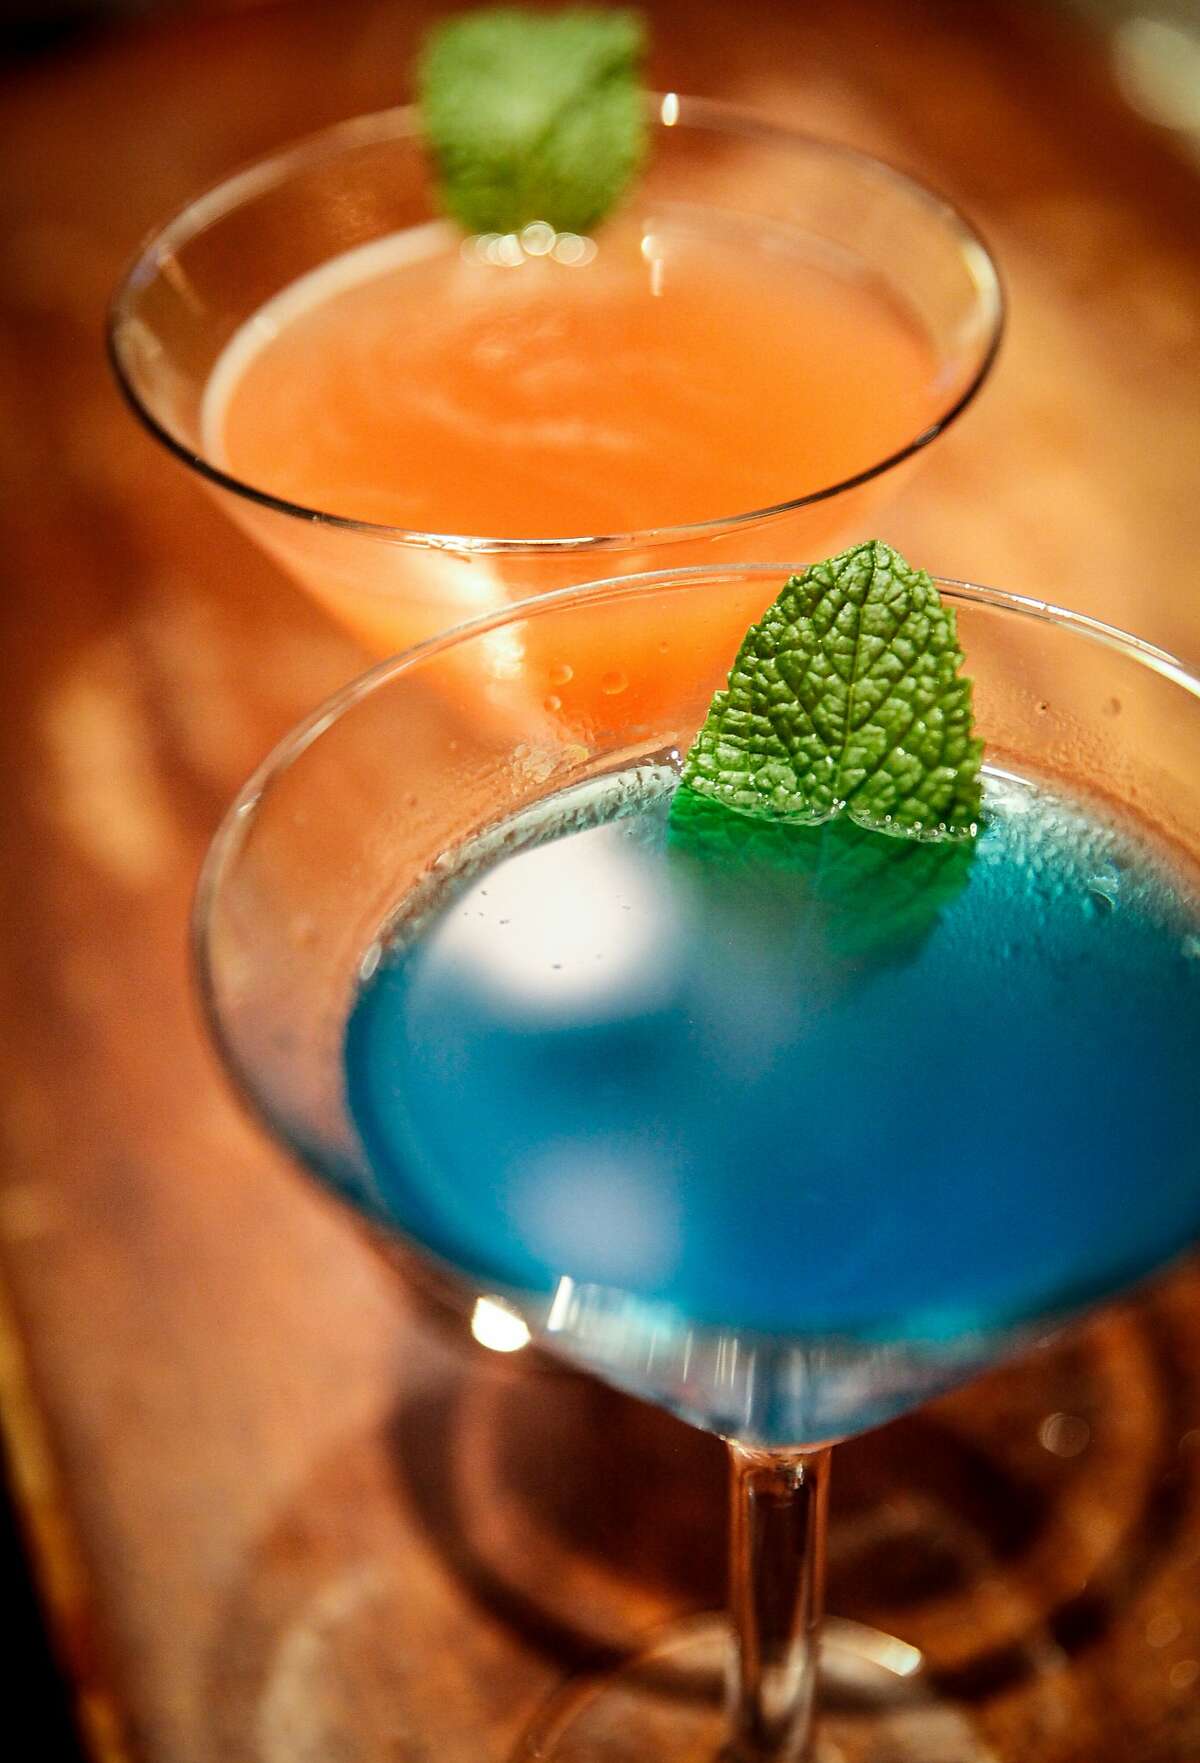 The namesake drinks, a blue and a pink sardine martini, at the Sardine Factory in Monterey, Calif., Saturday, November 14, 2015. The blue sardine martini is gin, hpnotiq liquer, peach schnapps and blue curacao with a splash of fresh lime juice garnished with garden fresh mint. The pink sardine martini is x rated vodka infused with mango, passion fruit and blood orange, and a splash of pineapple in a mint leaf rimmed glass.